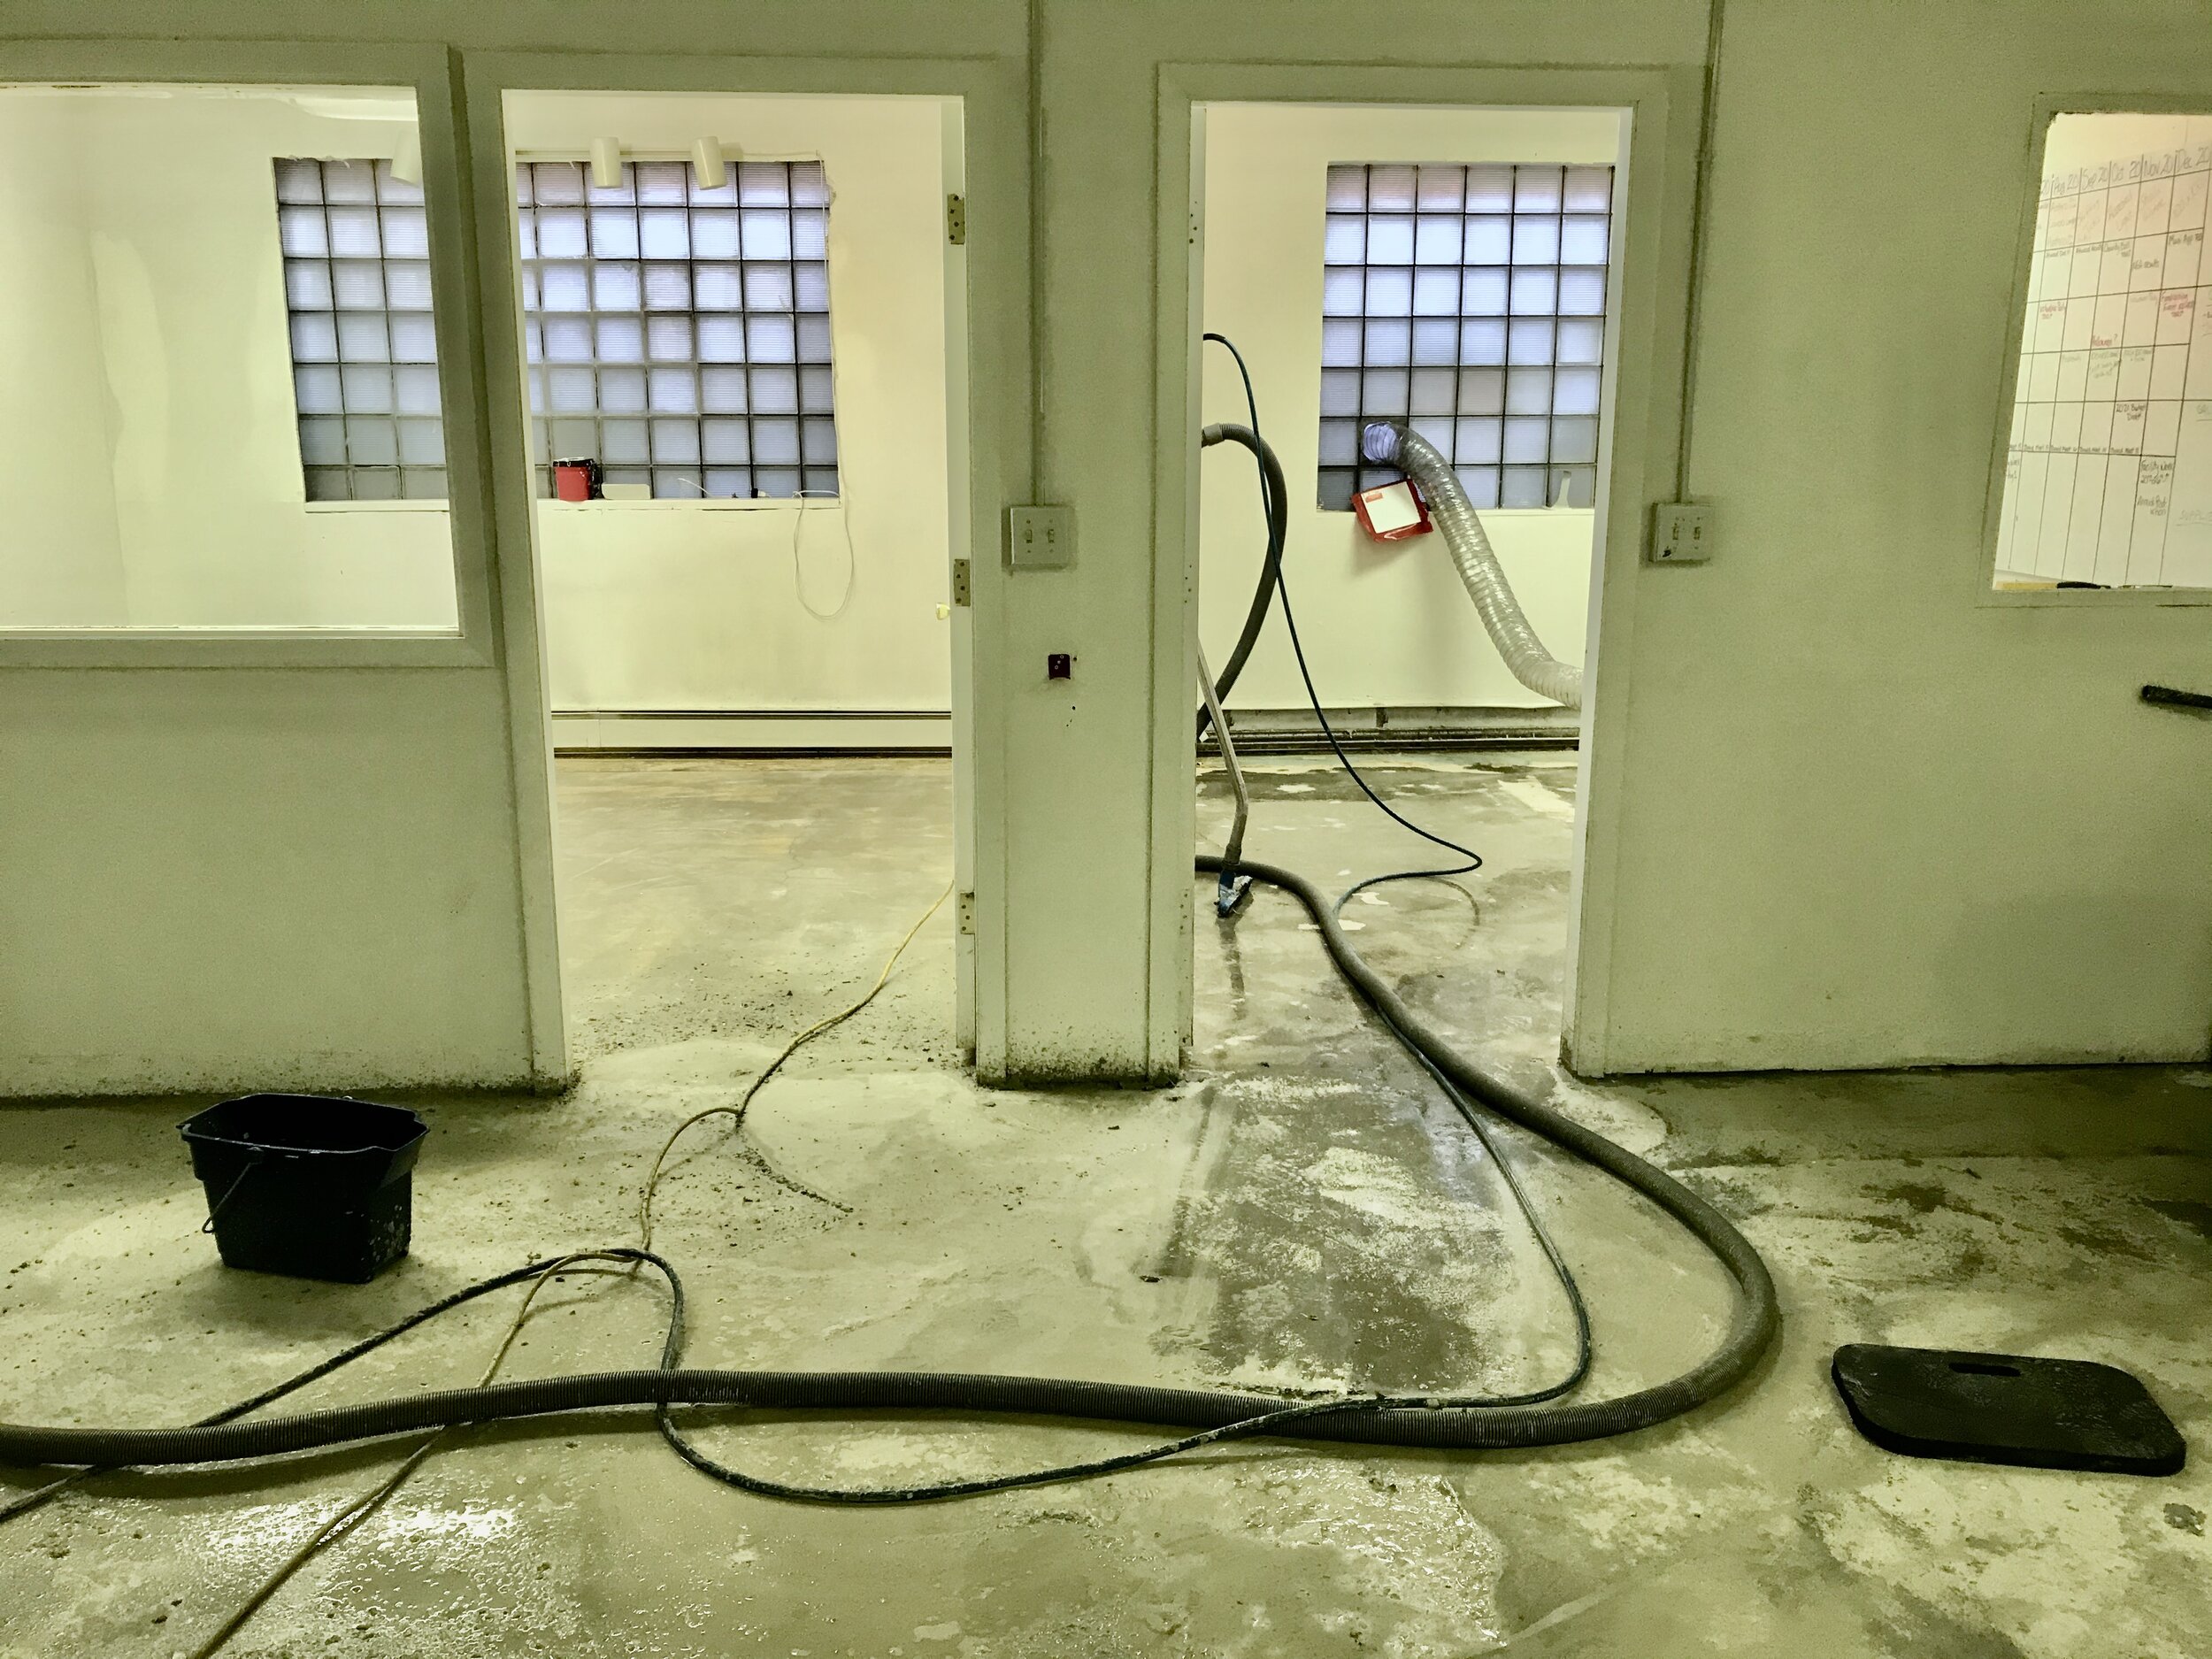  June 2020 - We took advantage of the colsure to do some much needed facility maintenance in our back area.  We mucked it out, scrubbed it down, and gave the floor a shiny new coat of paint. 